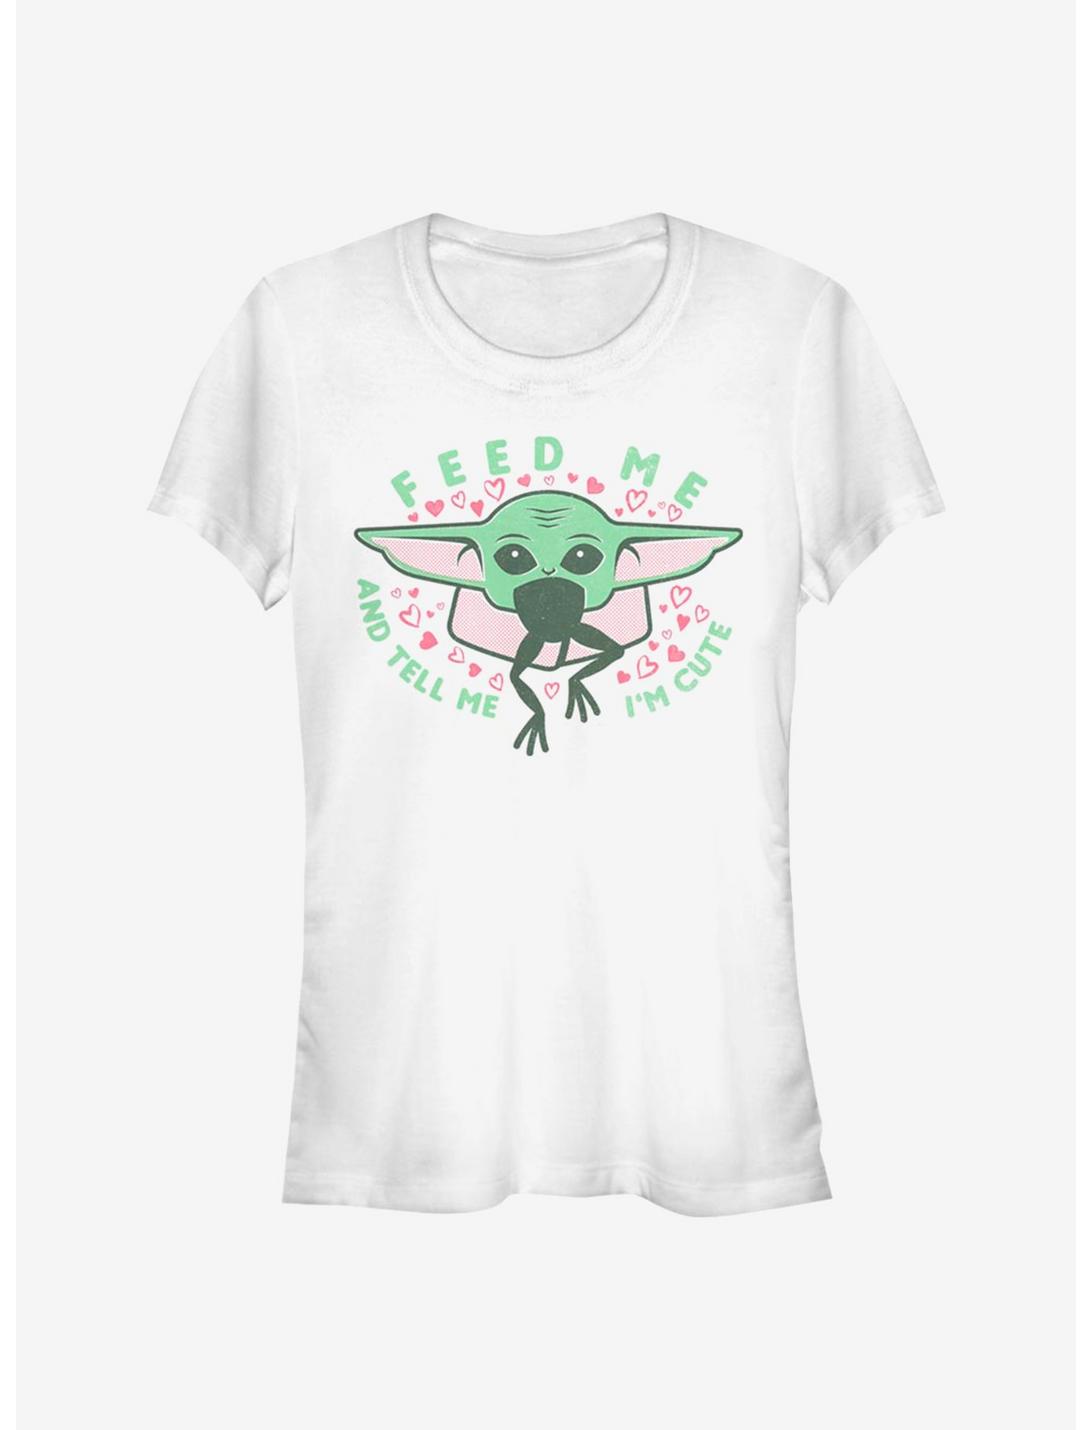 Star Wars The Mandalorian Feed Me And Tell Me I'm Cute The Child Girls T-Shirt, WHITE, hi-res